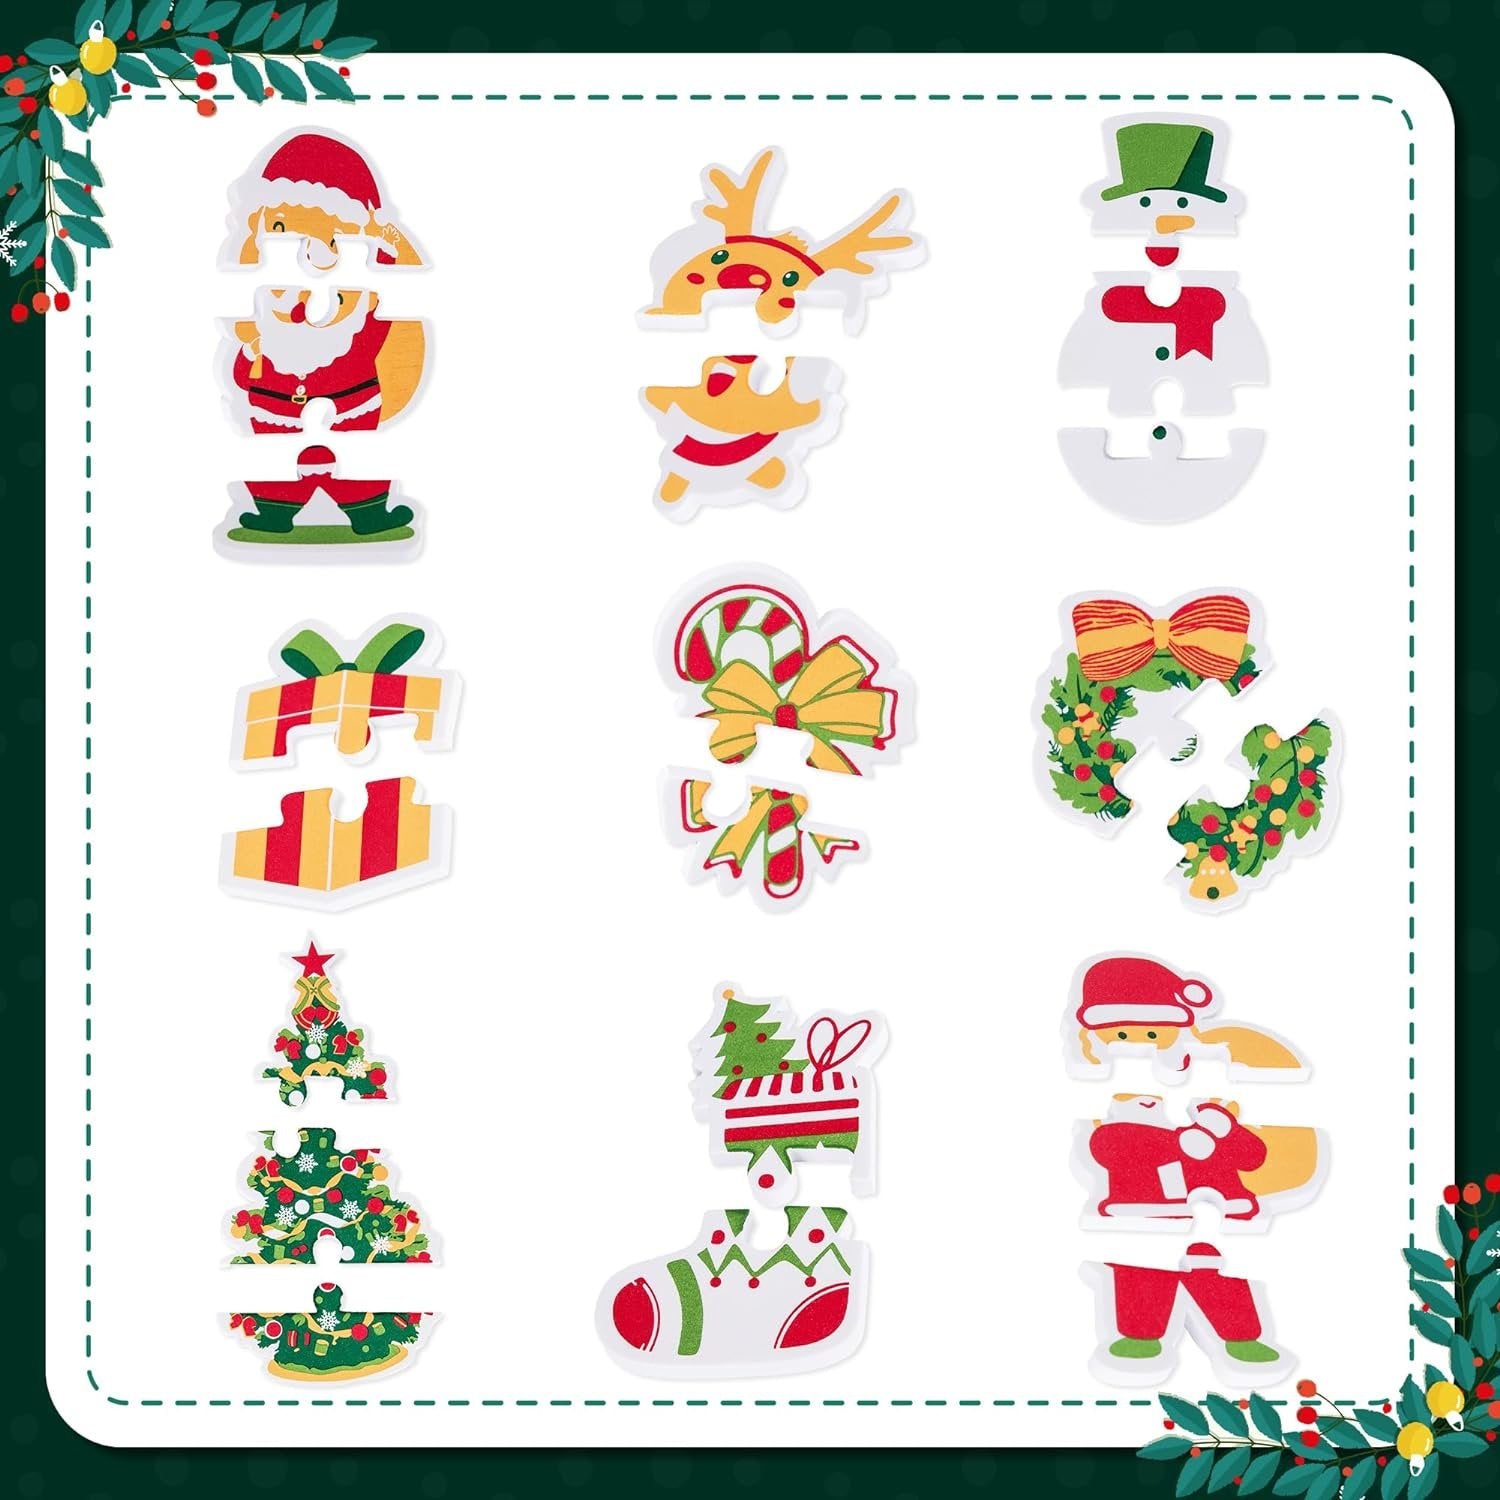 Christmas Puzzle Toys for Babies - 9 Puzzles - EVA Christmas Baby Puzzle Toys for Infants That Float in Water - 9 Kids Christmas Puzzle Designs - Holiday Stocking Stuffers